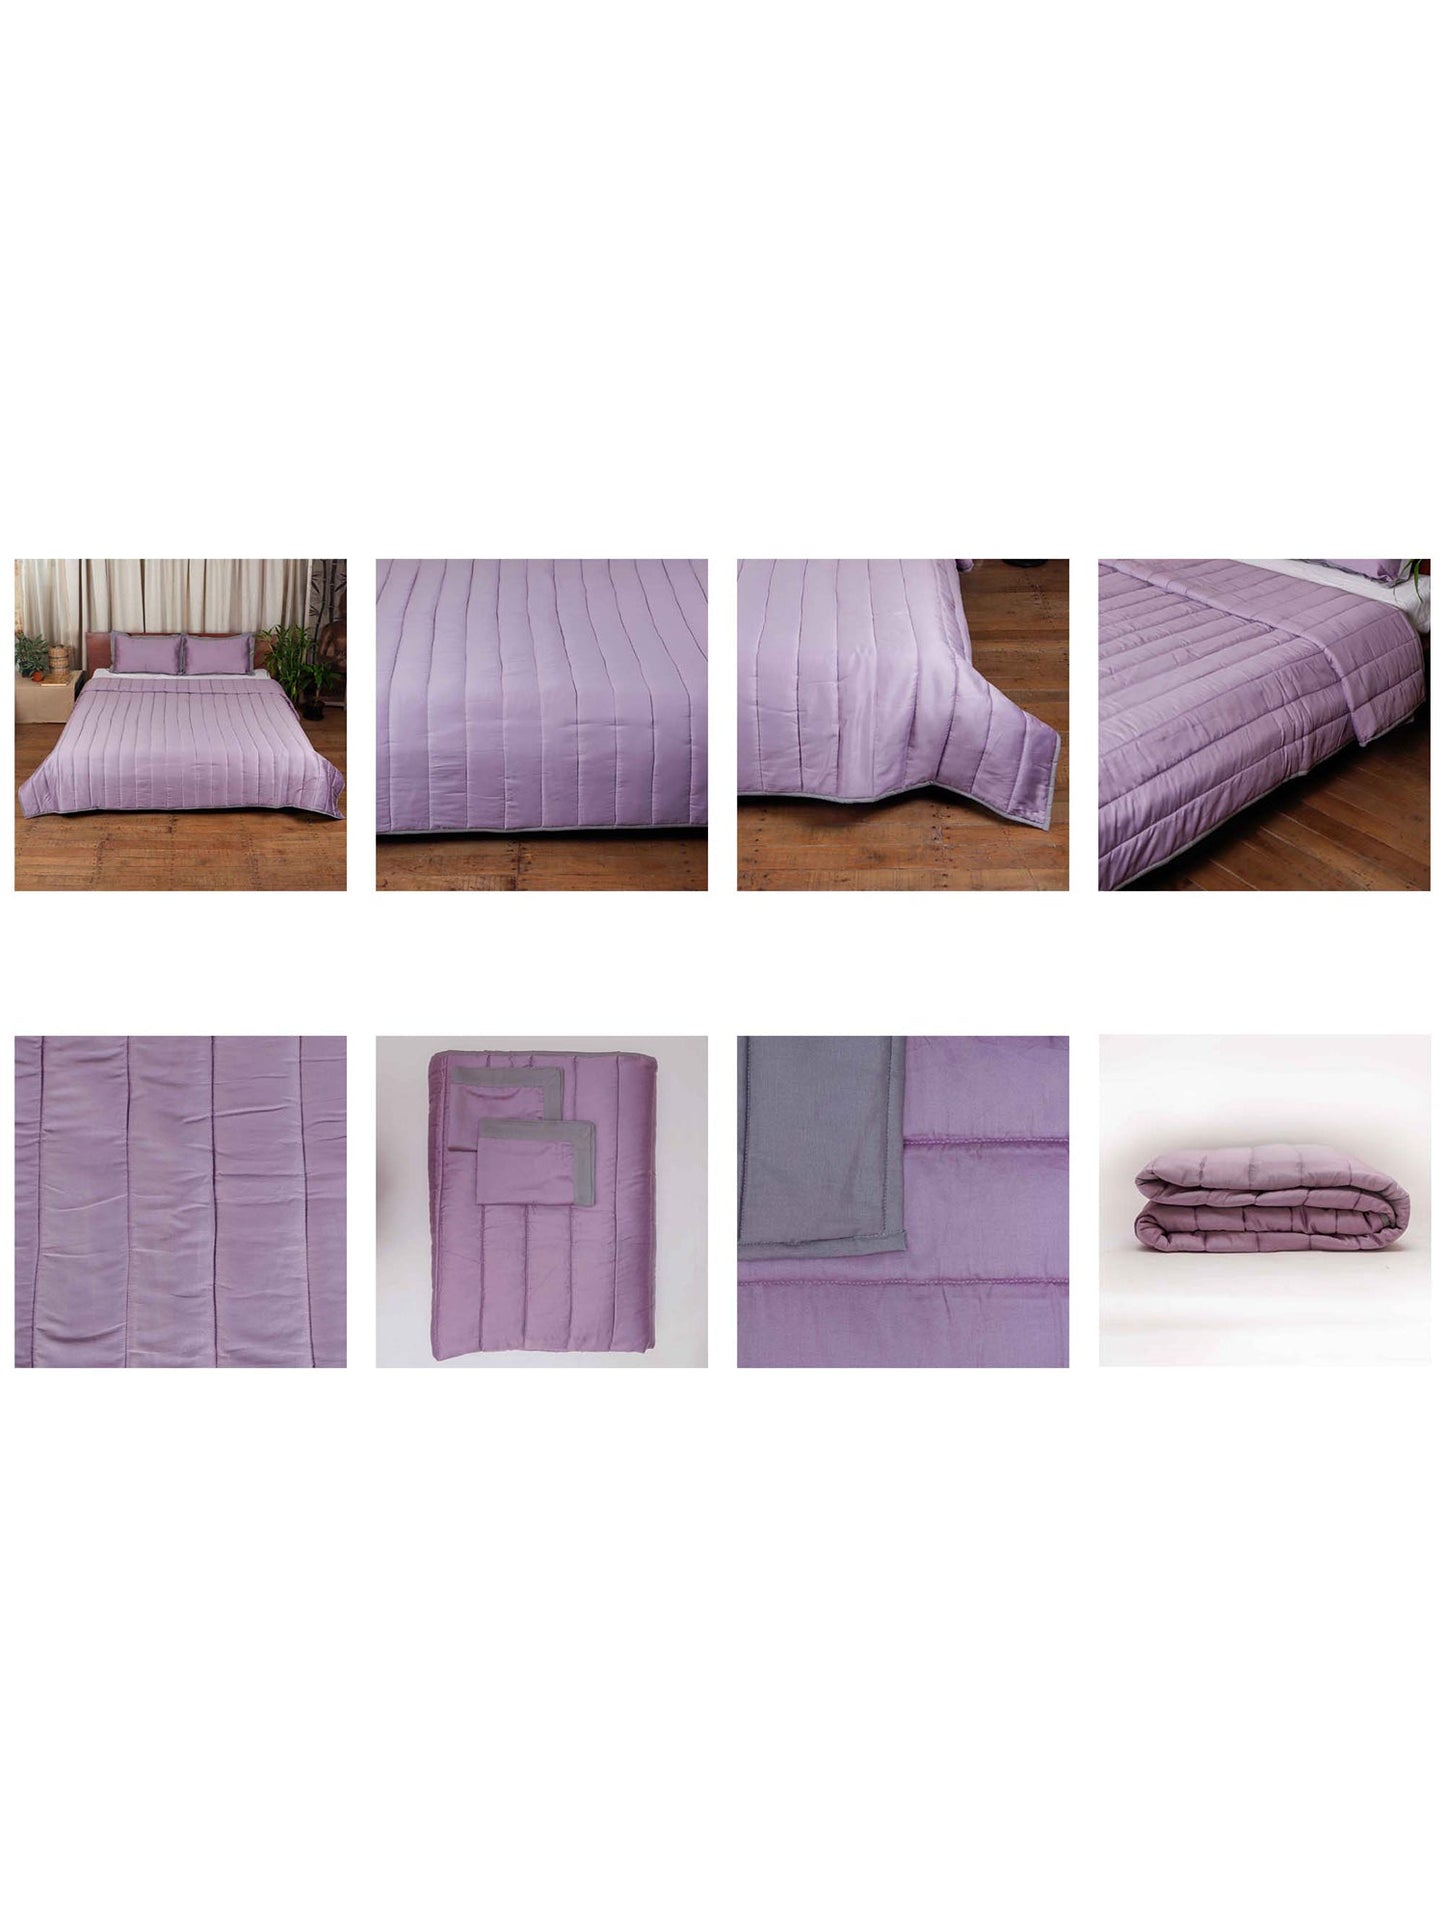 Quilt with 2 Pillow Shams Cotton Reversible Green and Purple - (90" X 108" ; Pillow - 17" X 27")